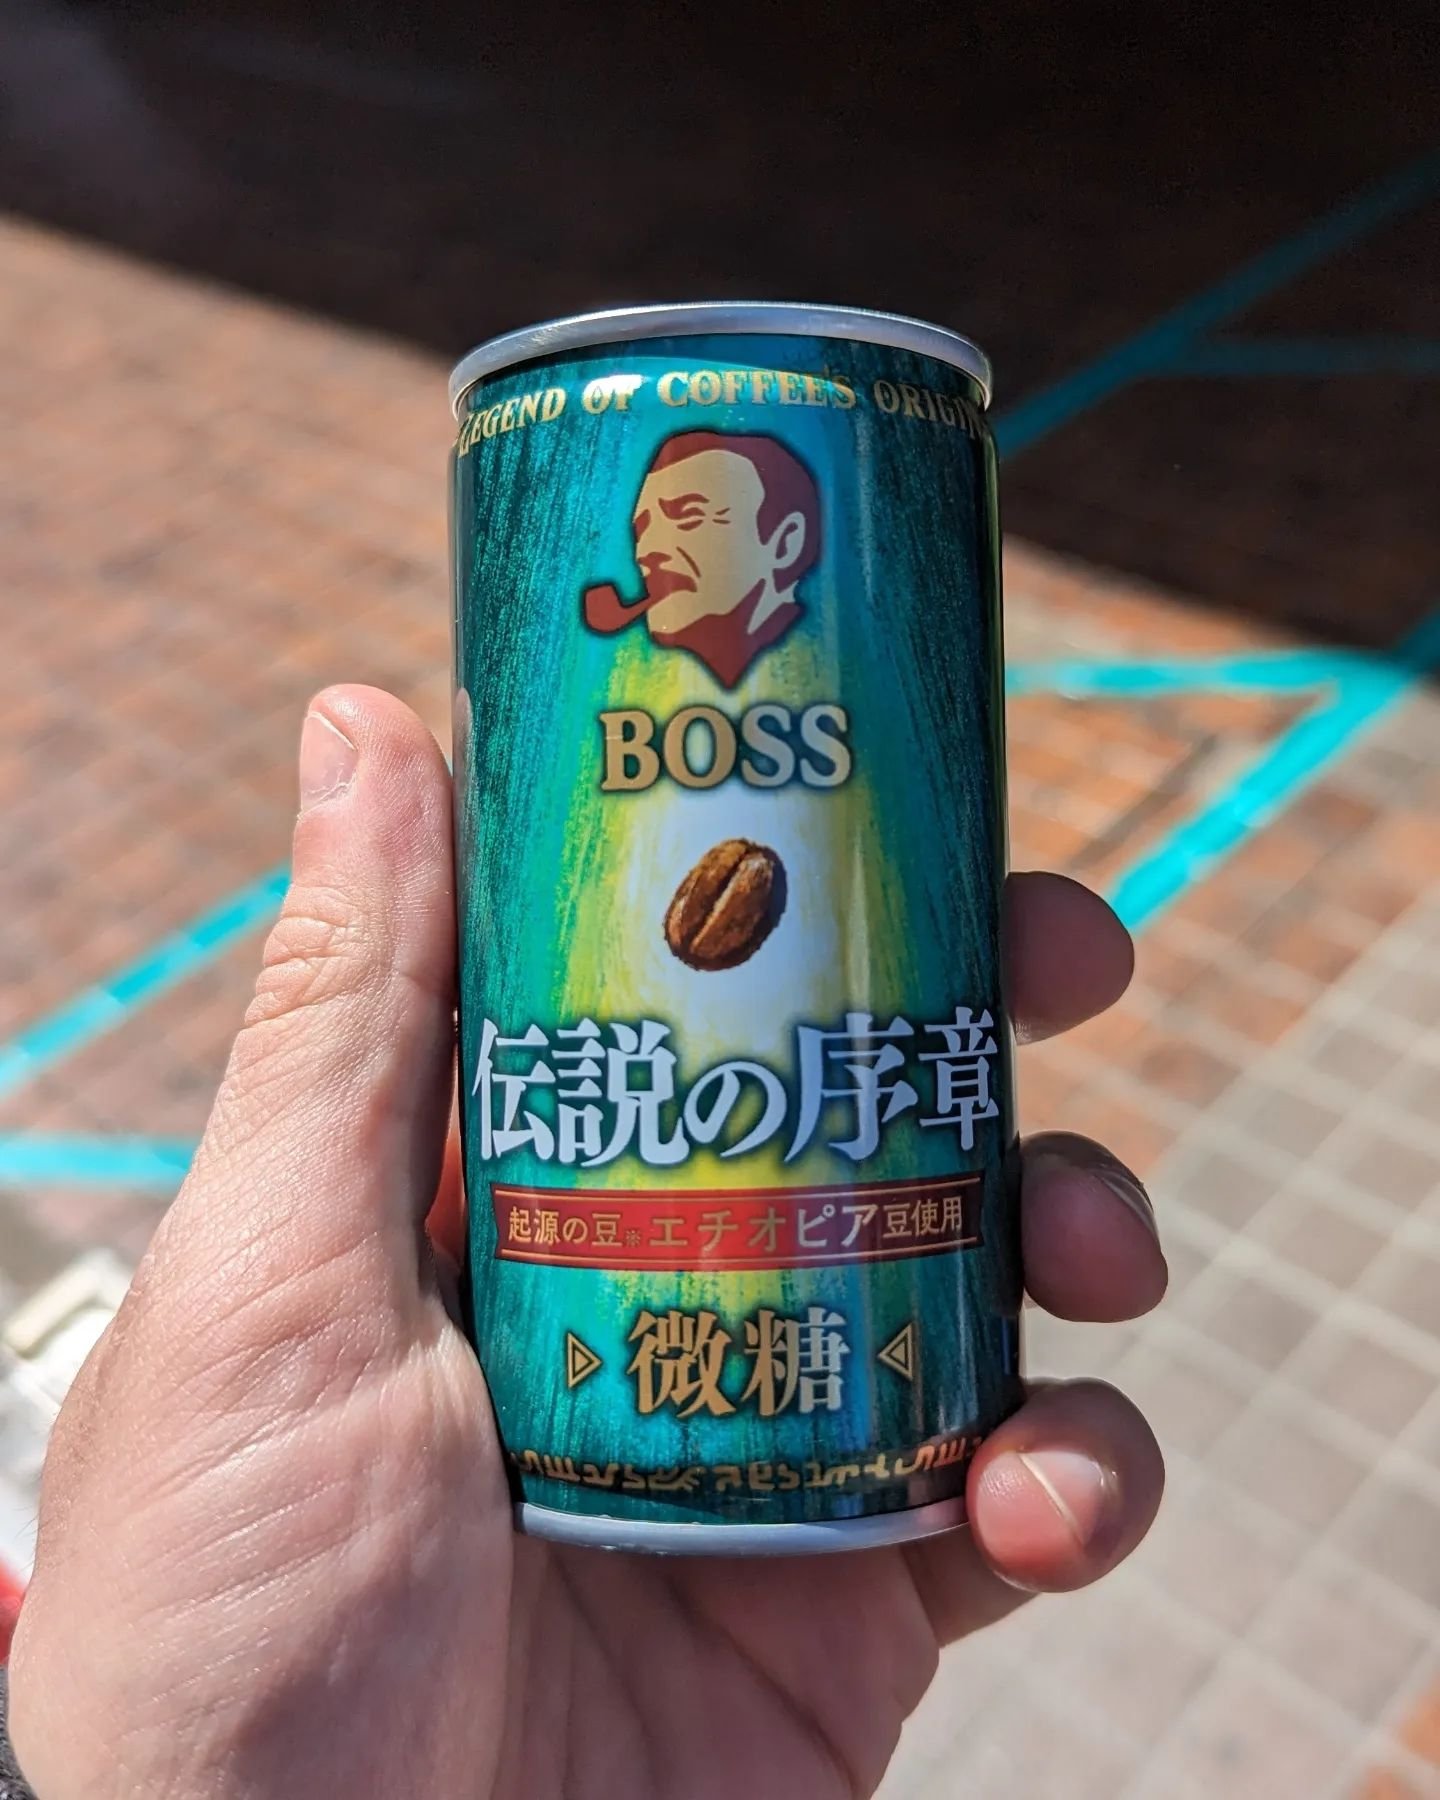 Boss Coffee bussin'. I had to try every different one I found.